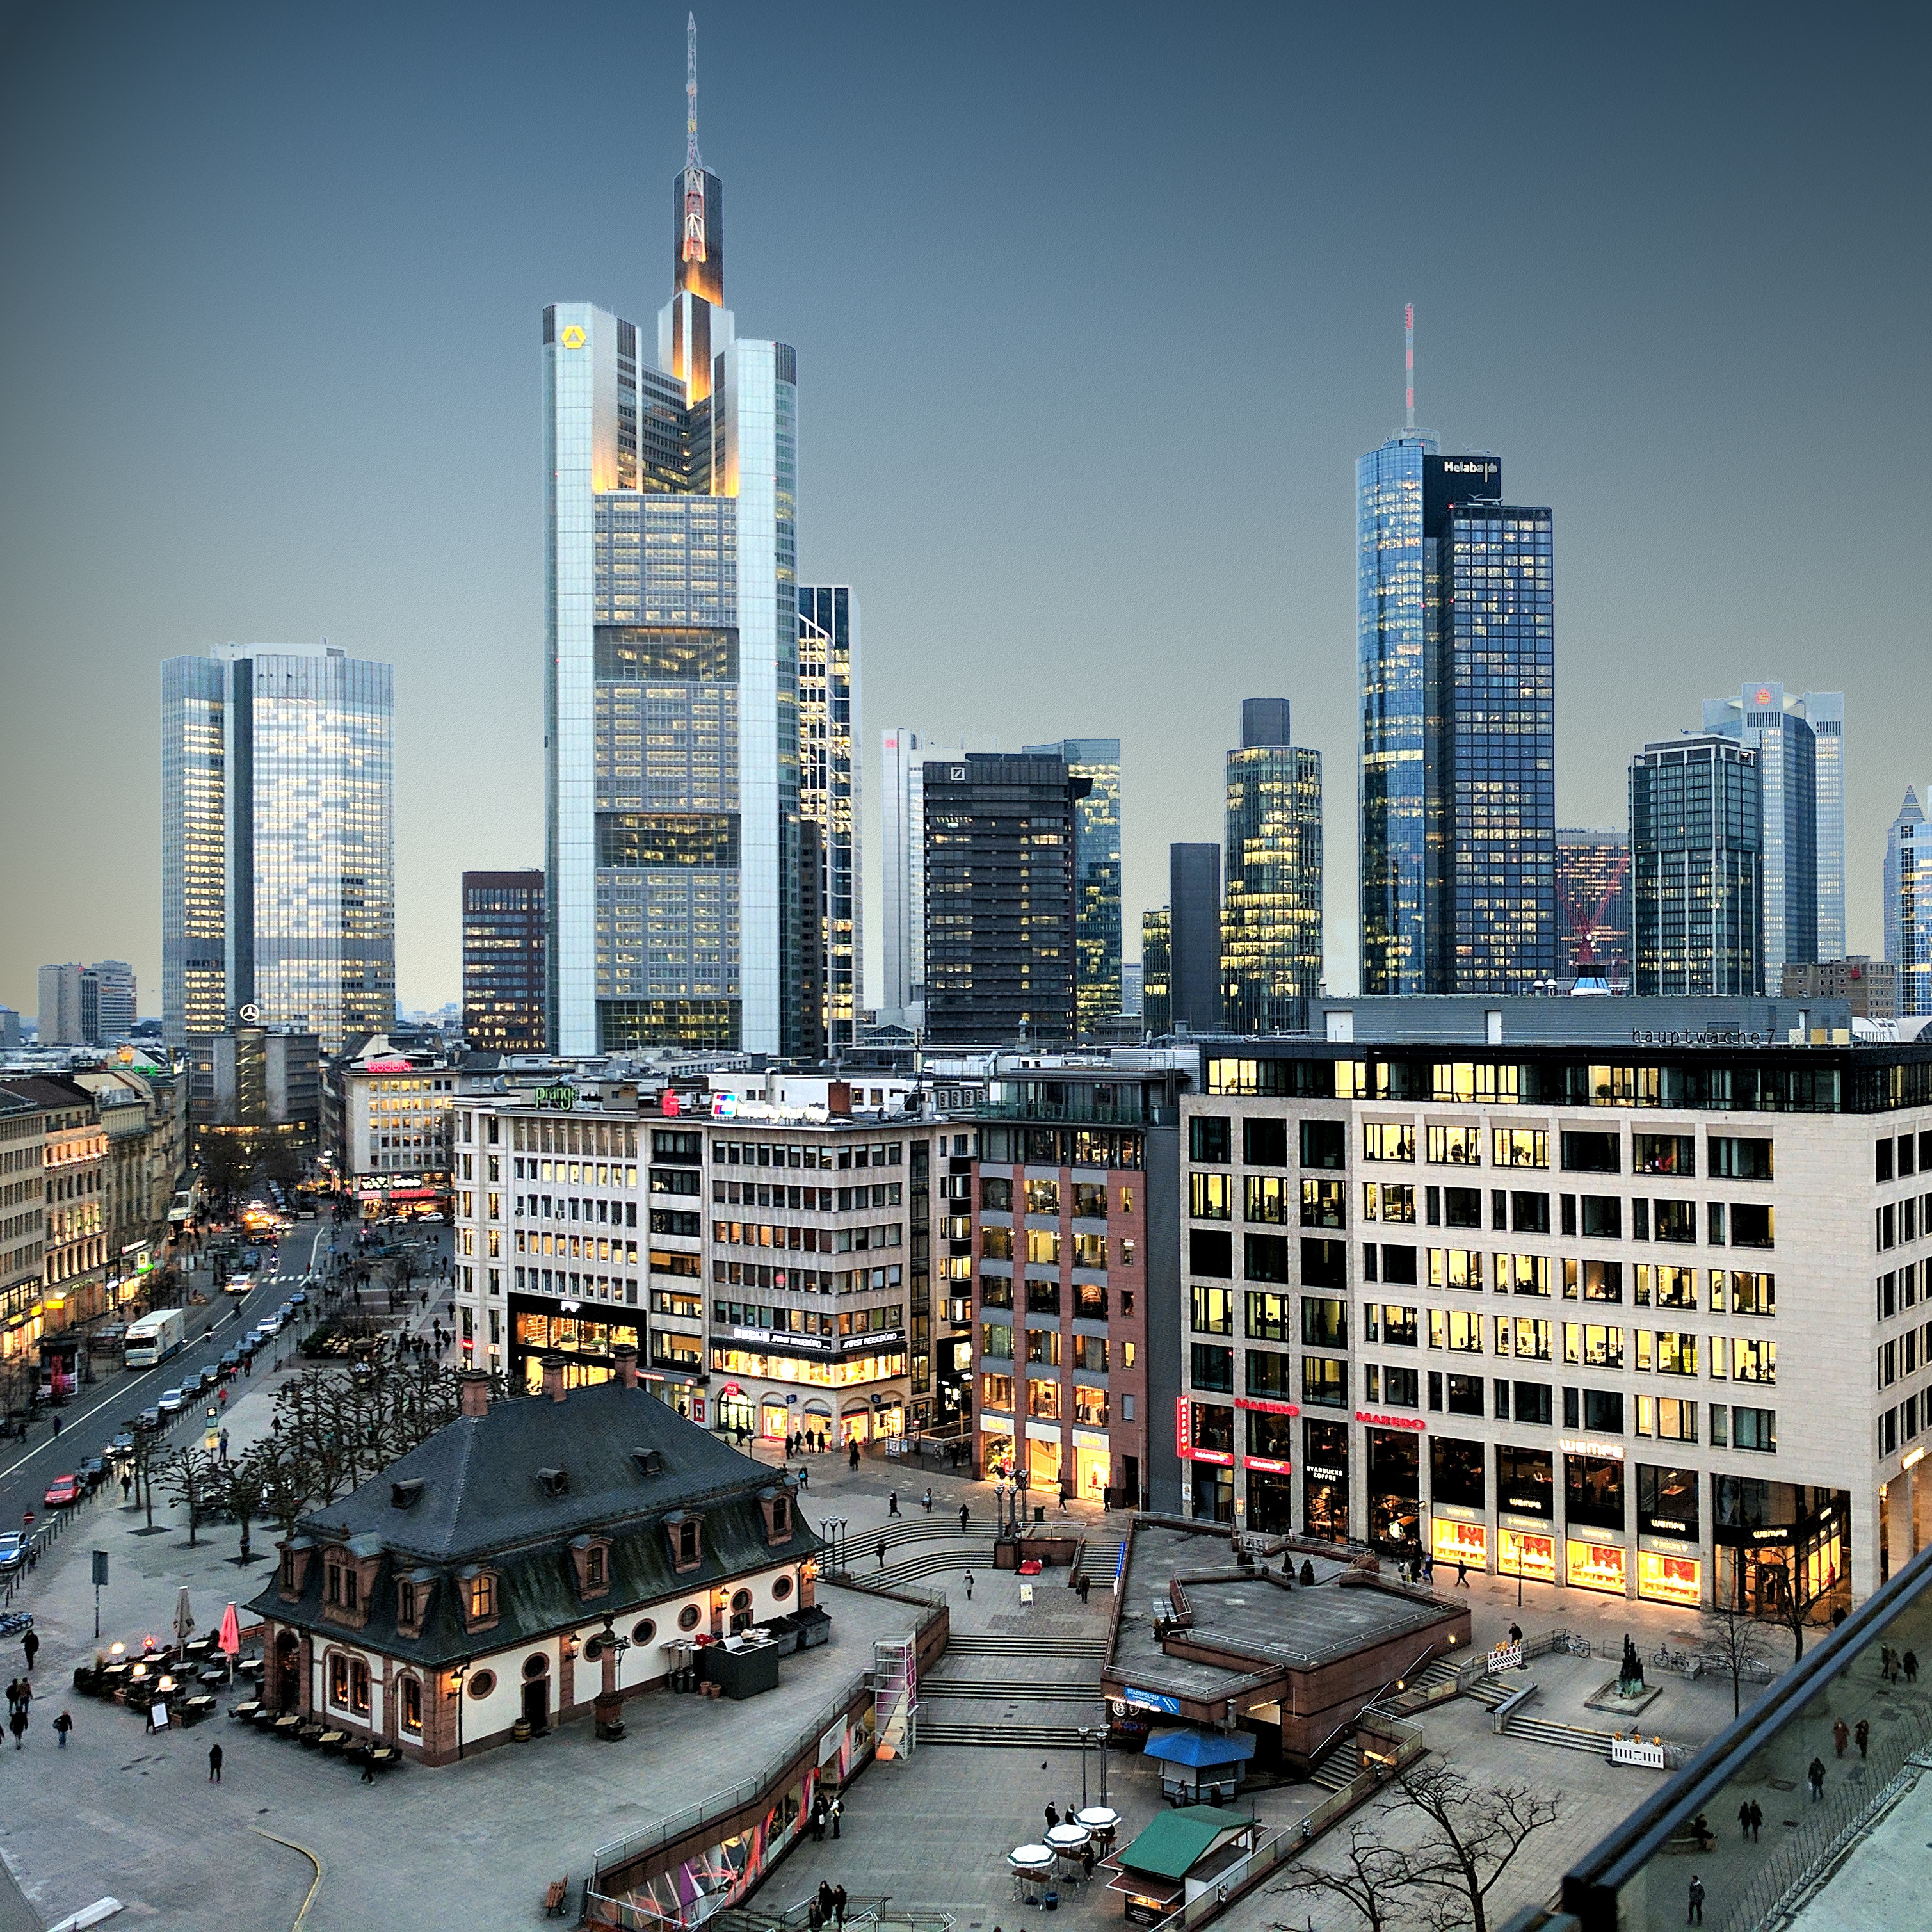 10 facts you probably didn’t know about Frankfurt (even if you live there)